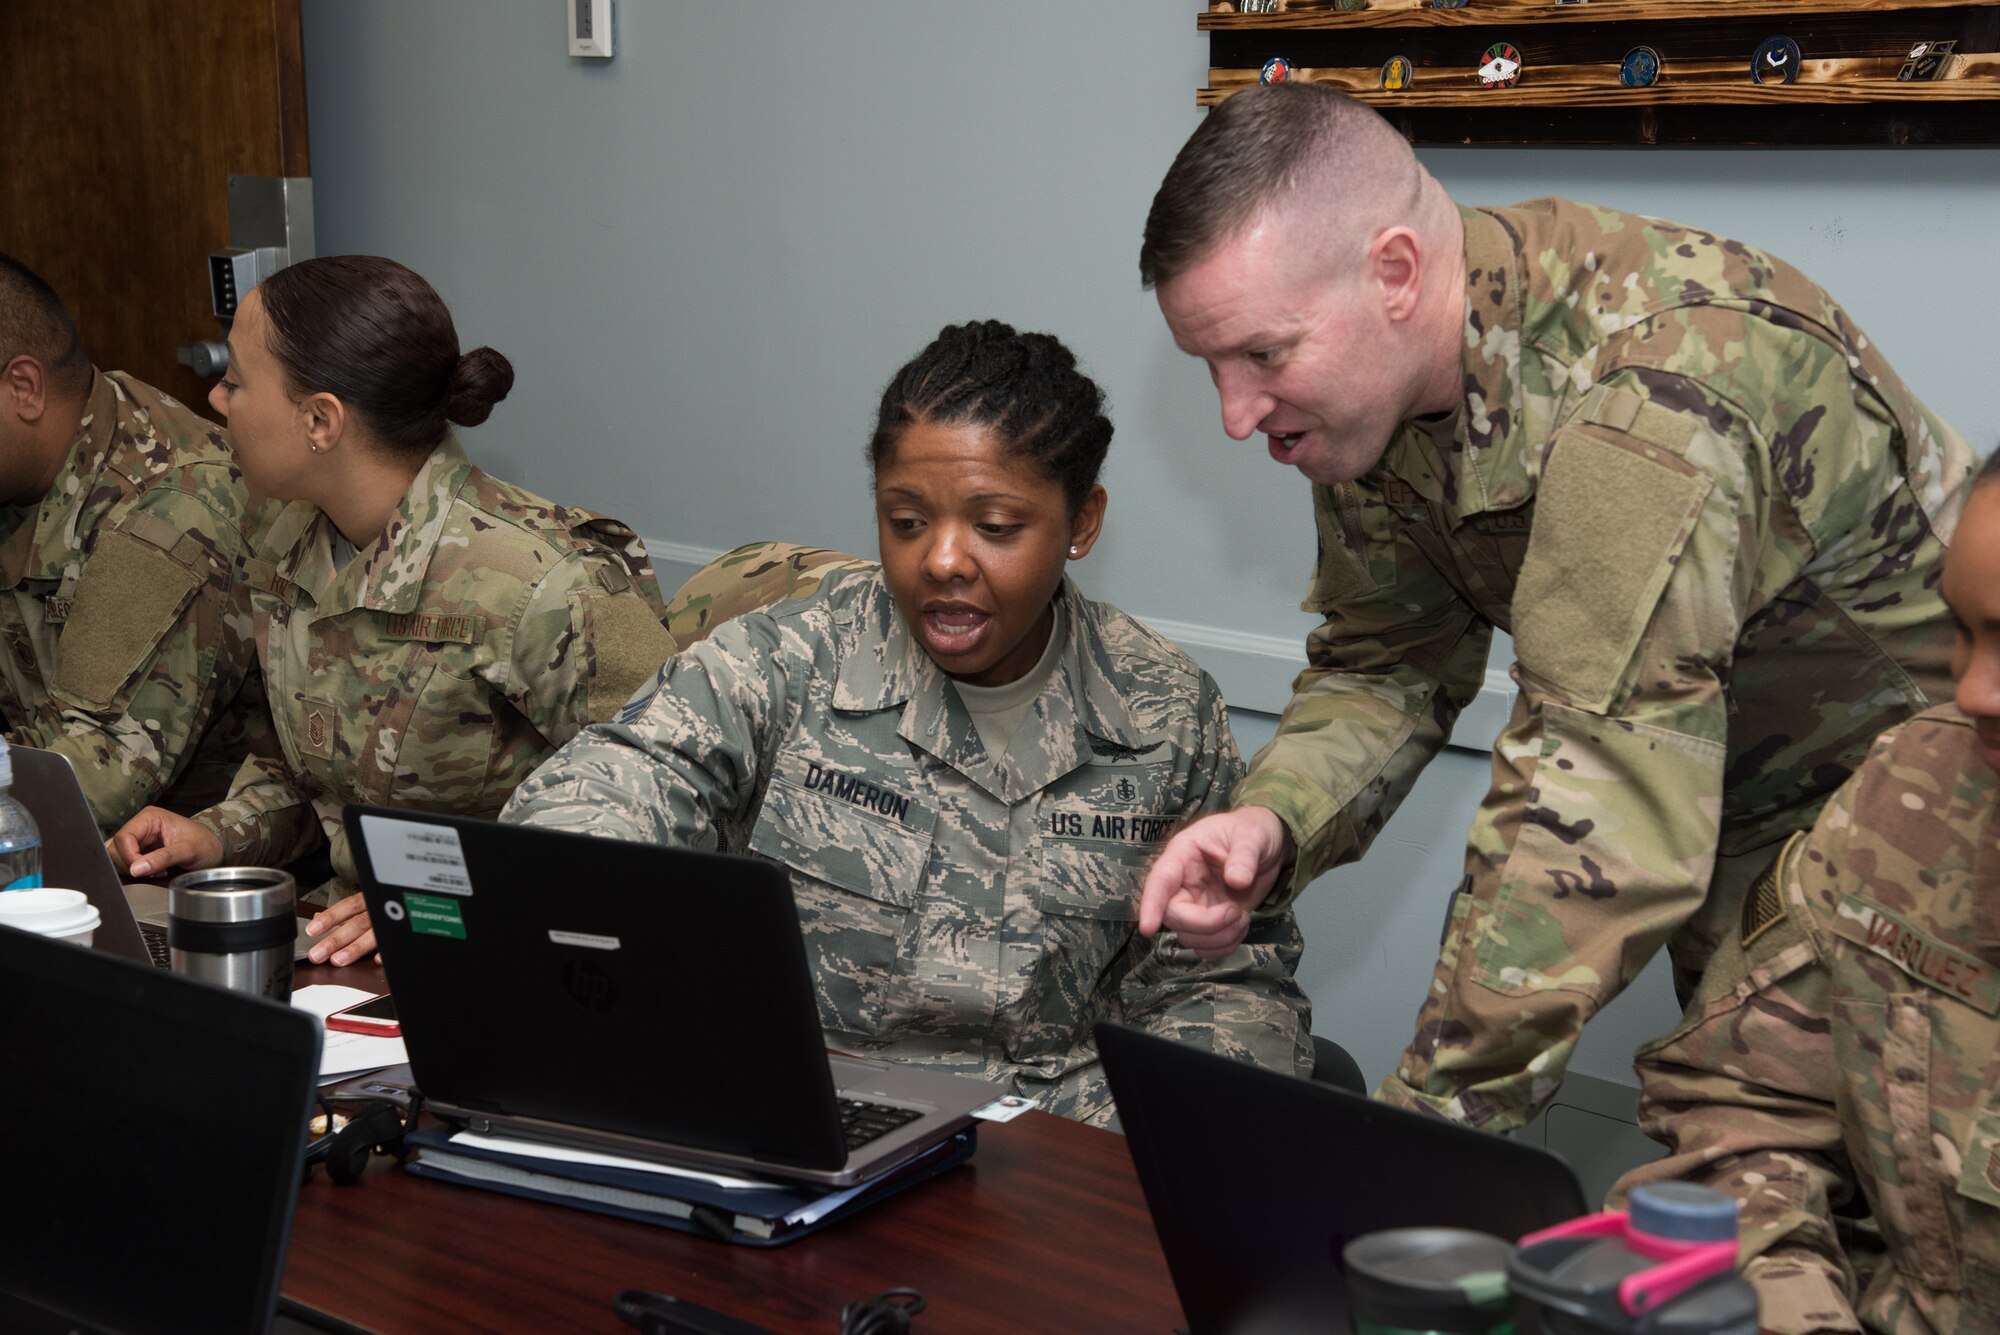 U.S. Air Force First Sergeant Academy Instructor Master Sgt. Robert M. Stephens leads a classroom discussion, Mar. 19, 2019. Stephens is a first sergeant with the Arkansas Air National Guard's 188th Wing, and the first adjunct instructor to teach the academy's new curriculum. (U.S. Air Force photo by William Birchfield)